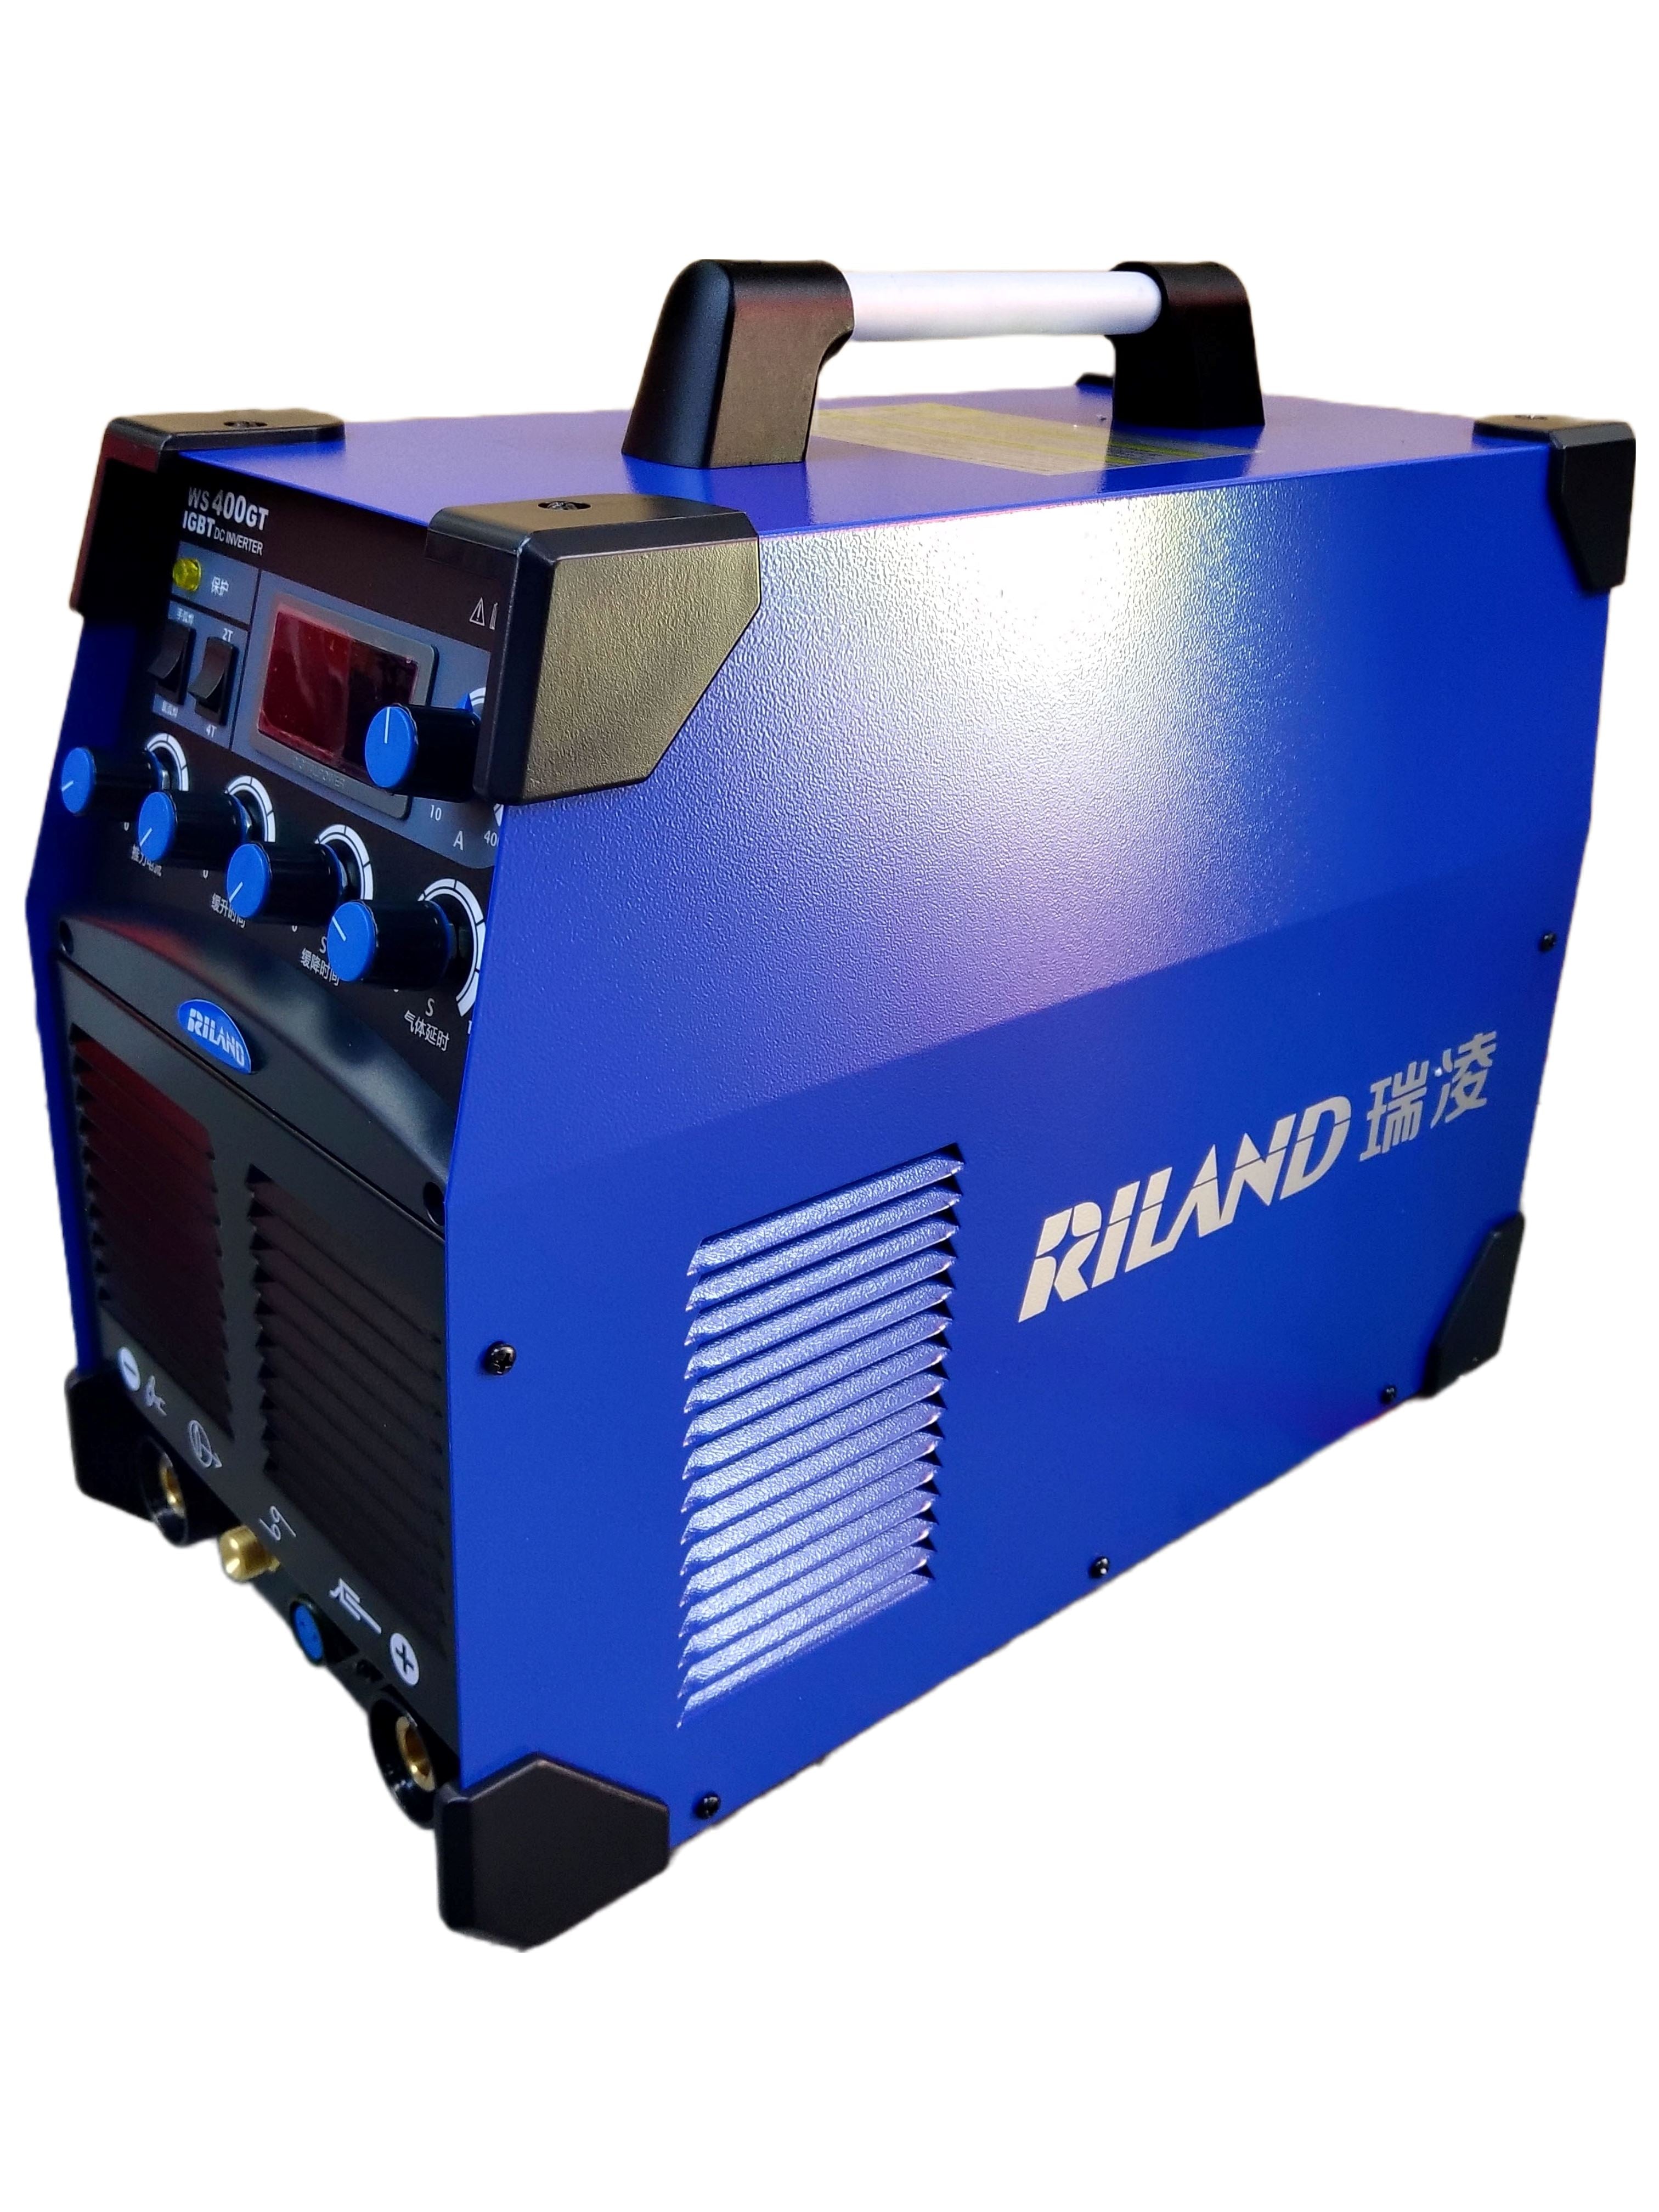 Riland WS400GT 380V Welding Machine Come With 10m WP26 Torch And 3m Ea